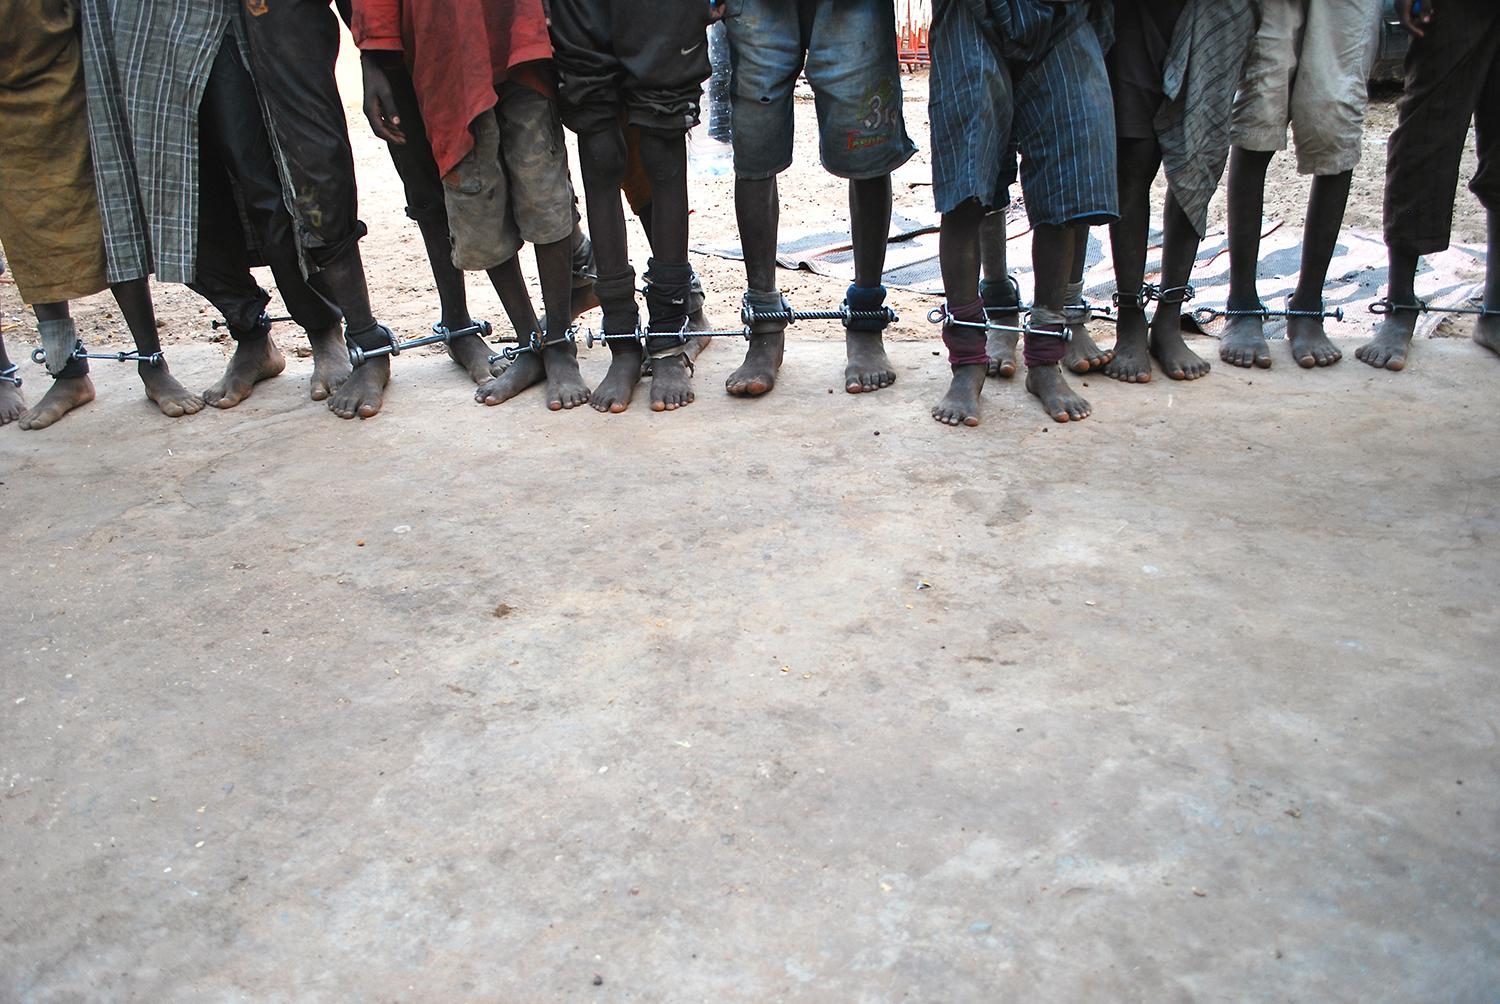 More than a dozen talibé boys between the ages of 6 and 14 were found shackled with iron bars in their Quranic school in Diourbel,Senegal